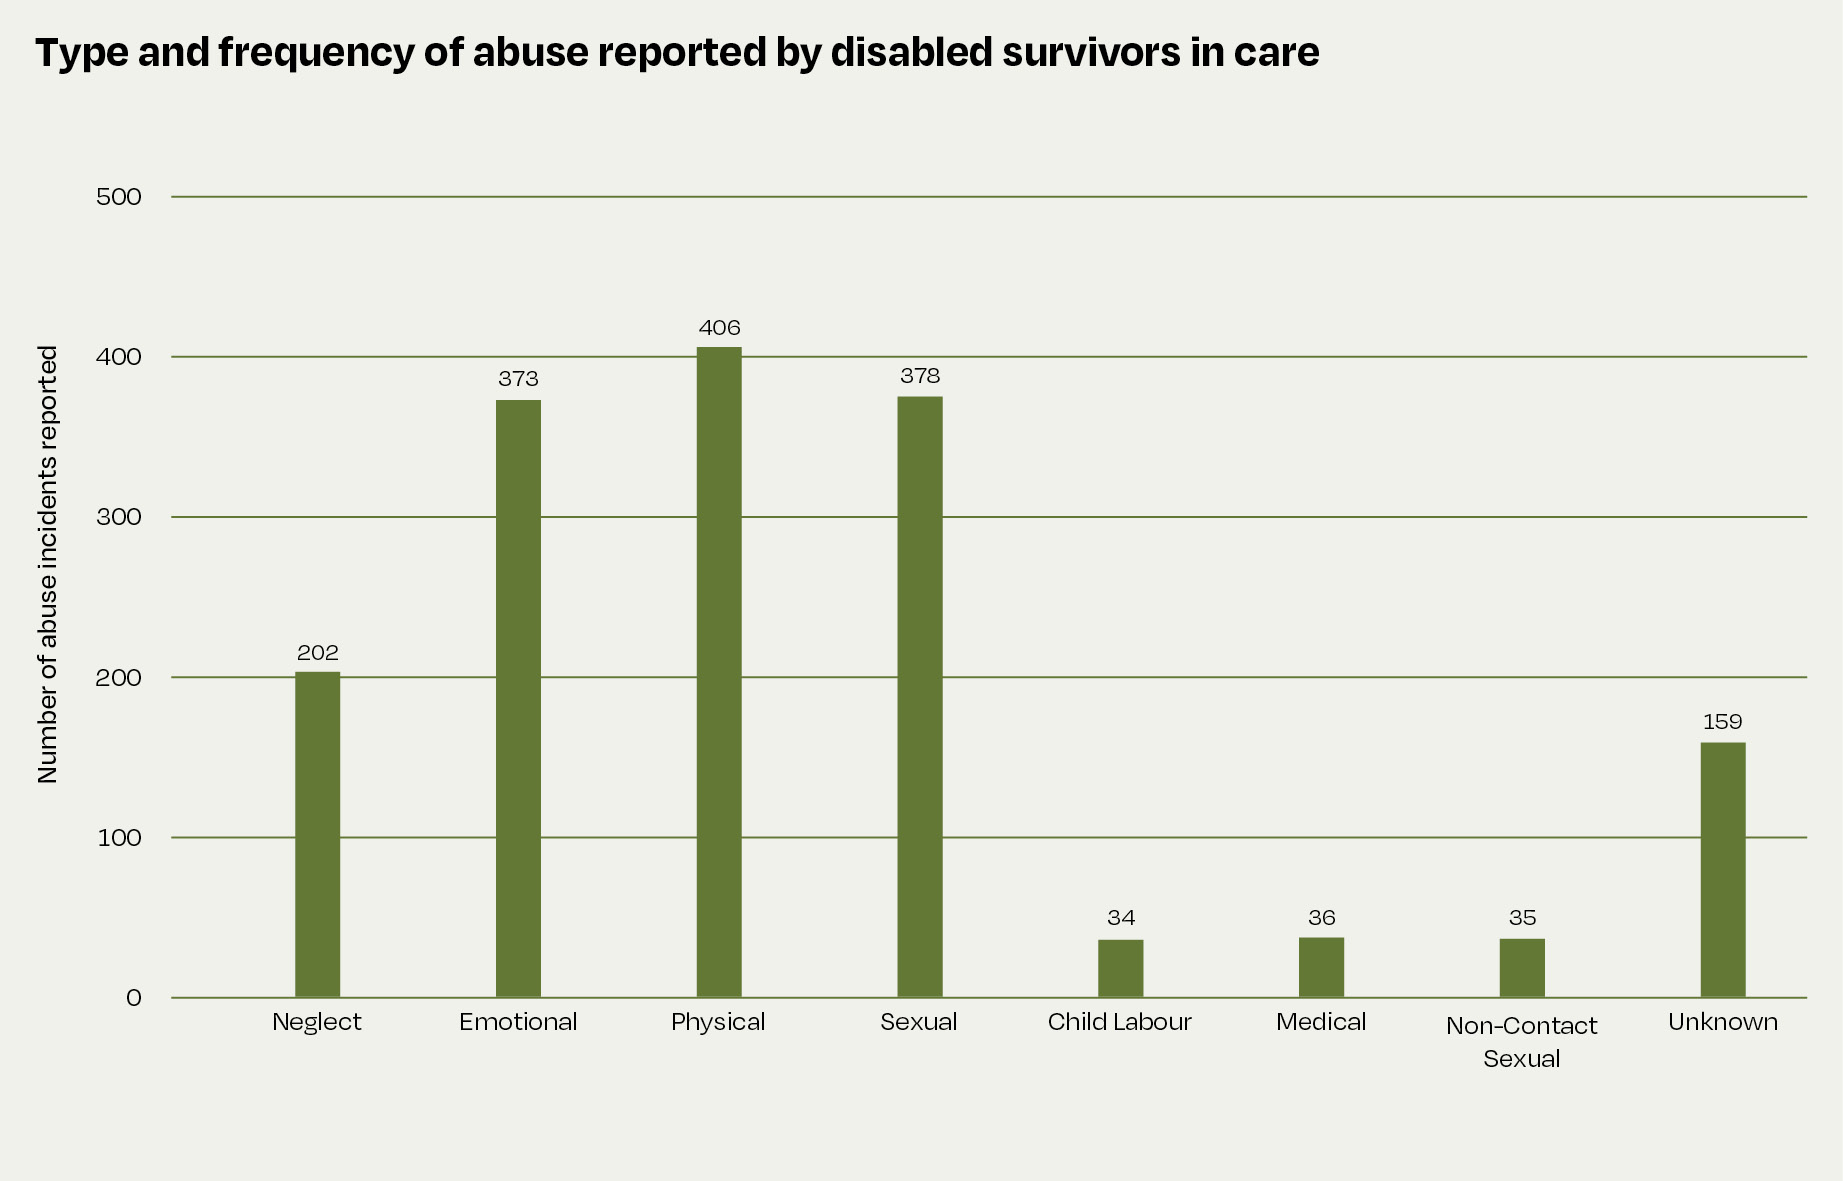 This bar graph shows the type and frequency of abuse experienced by disabled survivors in care. It shows that 202 disabled survivors experienced neglect, 373 experienced emotional abuse, 406 experienced physical abuse, 378 experienced sexual abuse, 34 experienced child labour, 36 experienced medical abuse, 35 experienced non-contact sexual abuse, and 159 experienced an unknown type of abuse. 